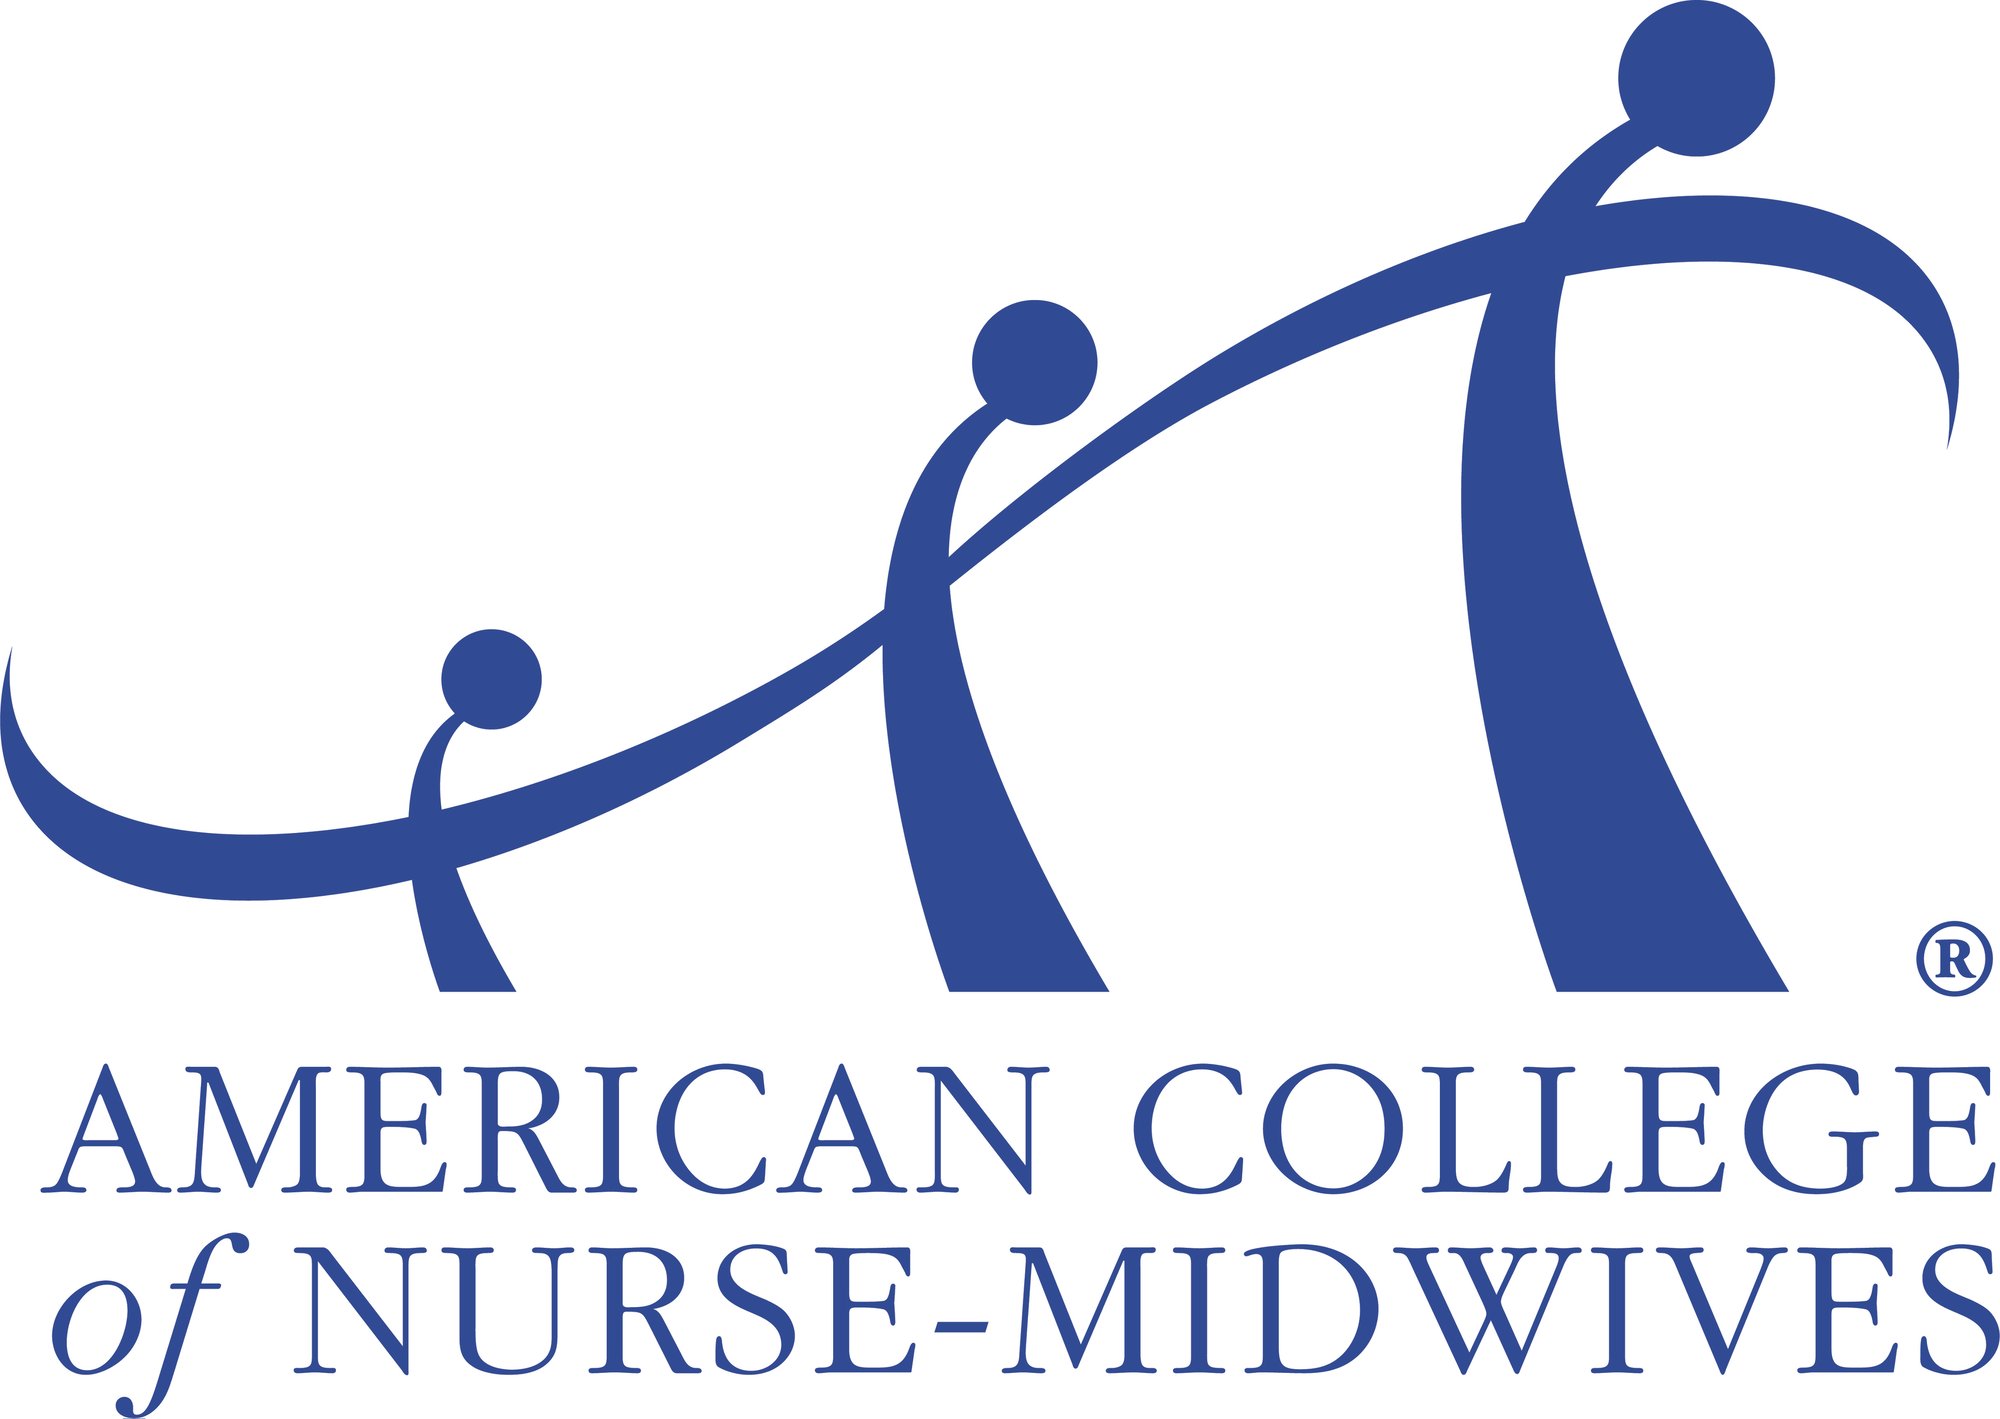 American College of Nurse-Midwives (ACNM)